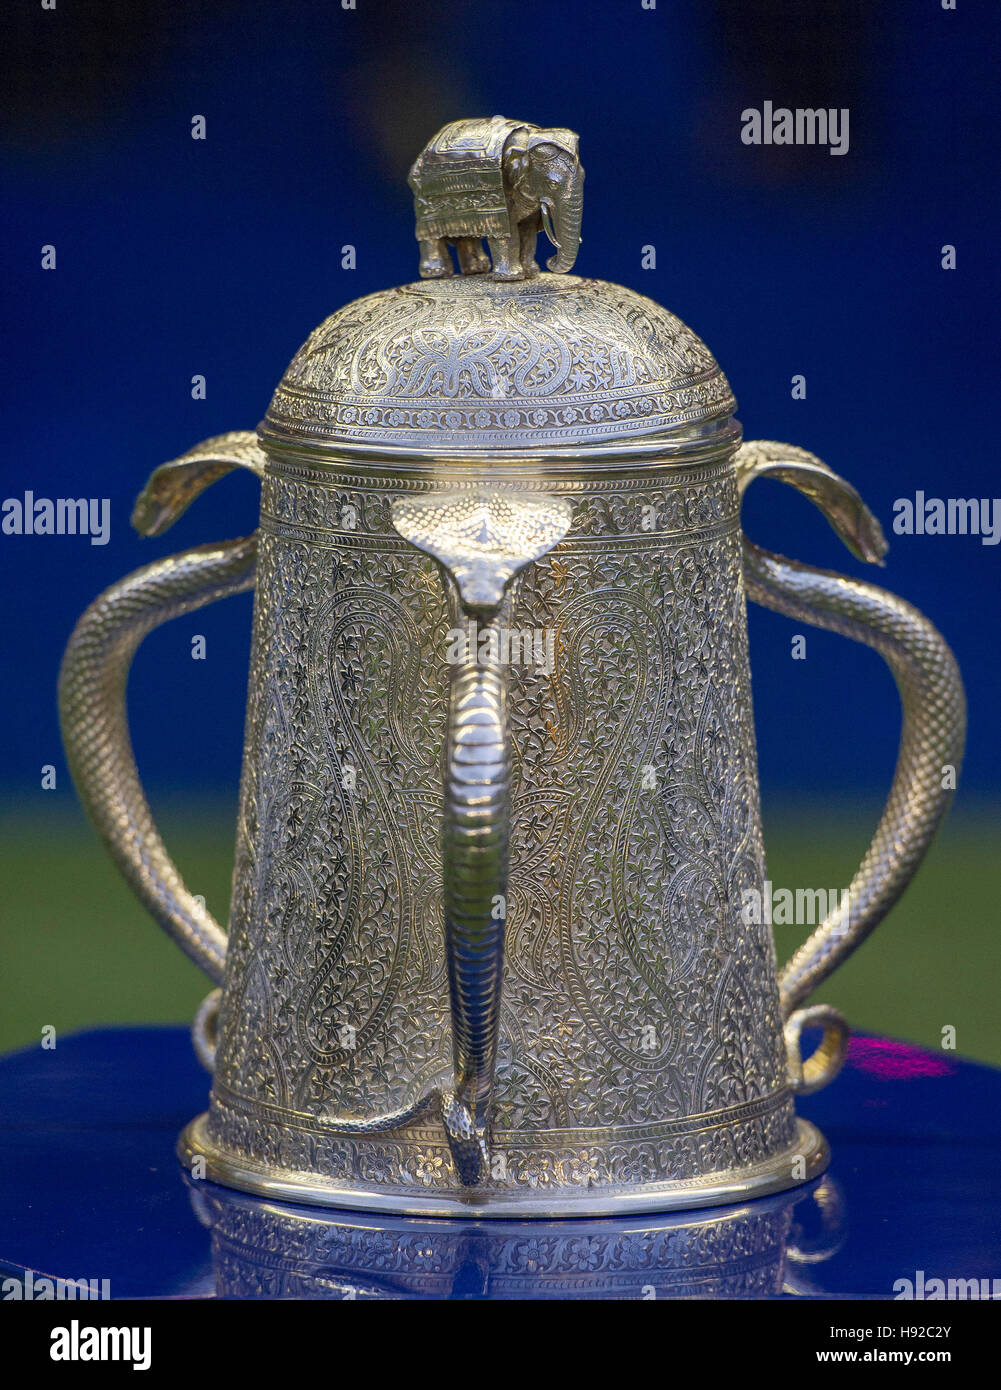 The Calcutta Cup is a rugby union trophy awarded to the winner of the annual Six Nations Championship match between England and Scotland. Stock Photo